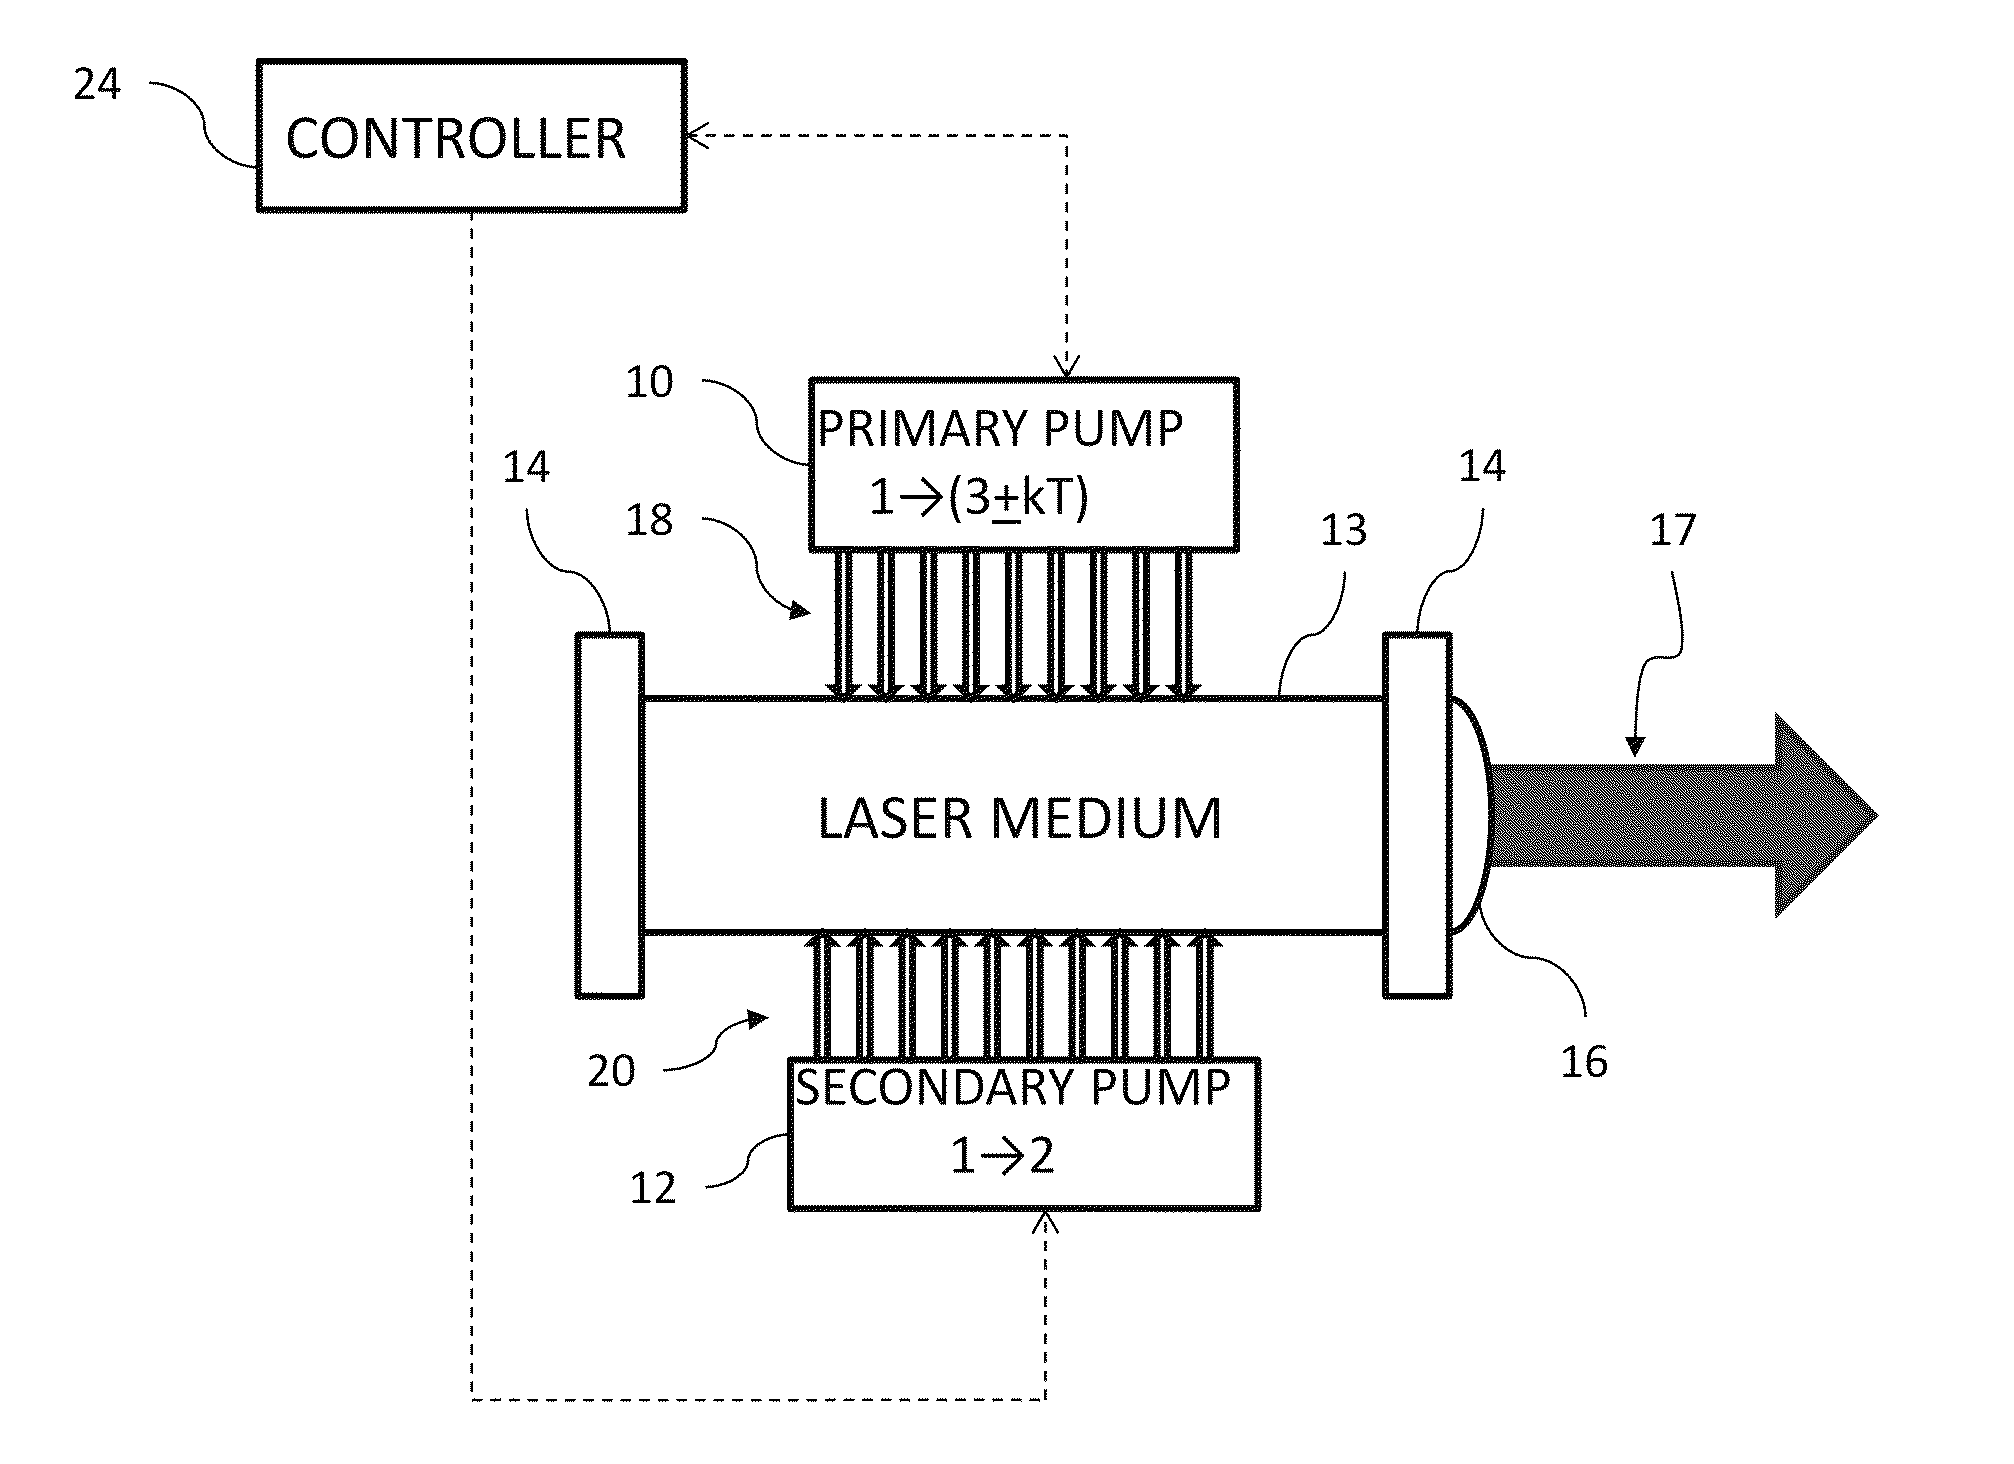 Dual channel pumping method laser with metal vapor and noble gas medium